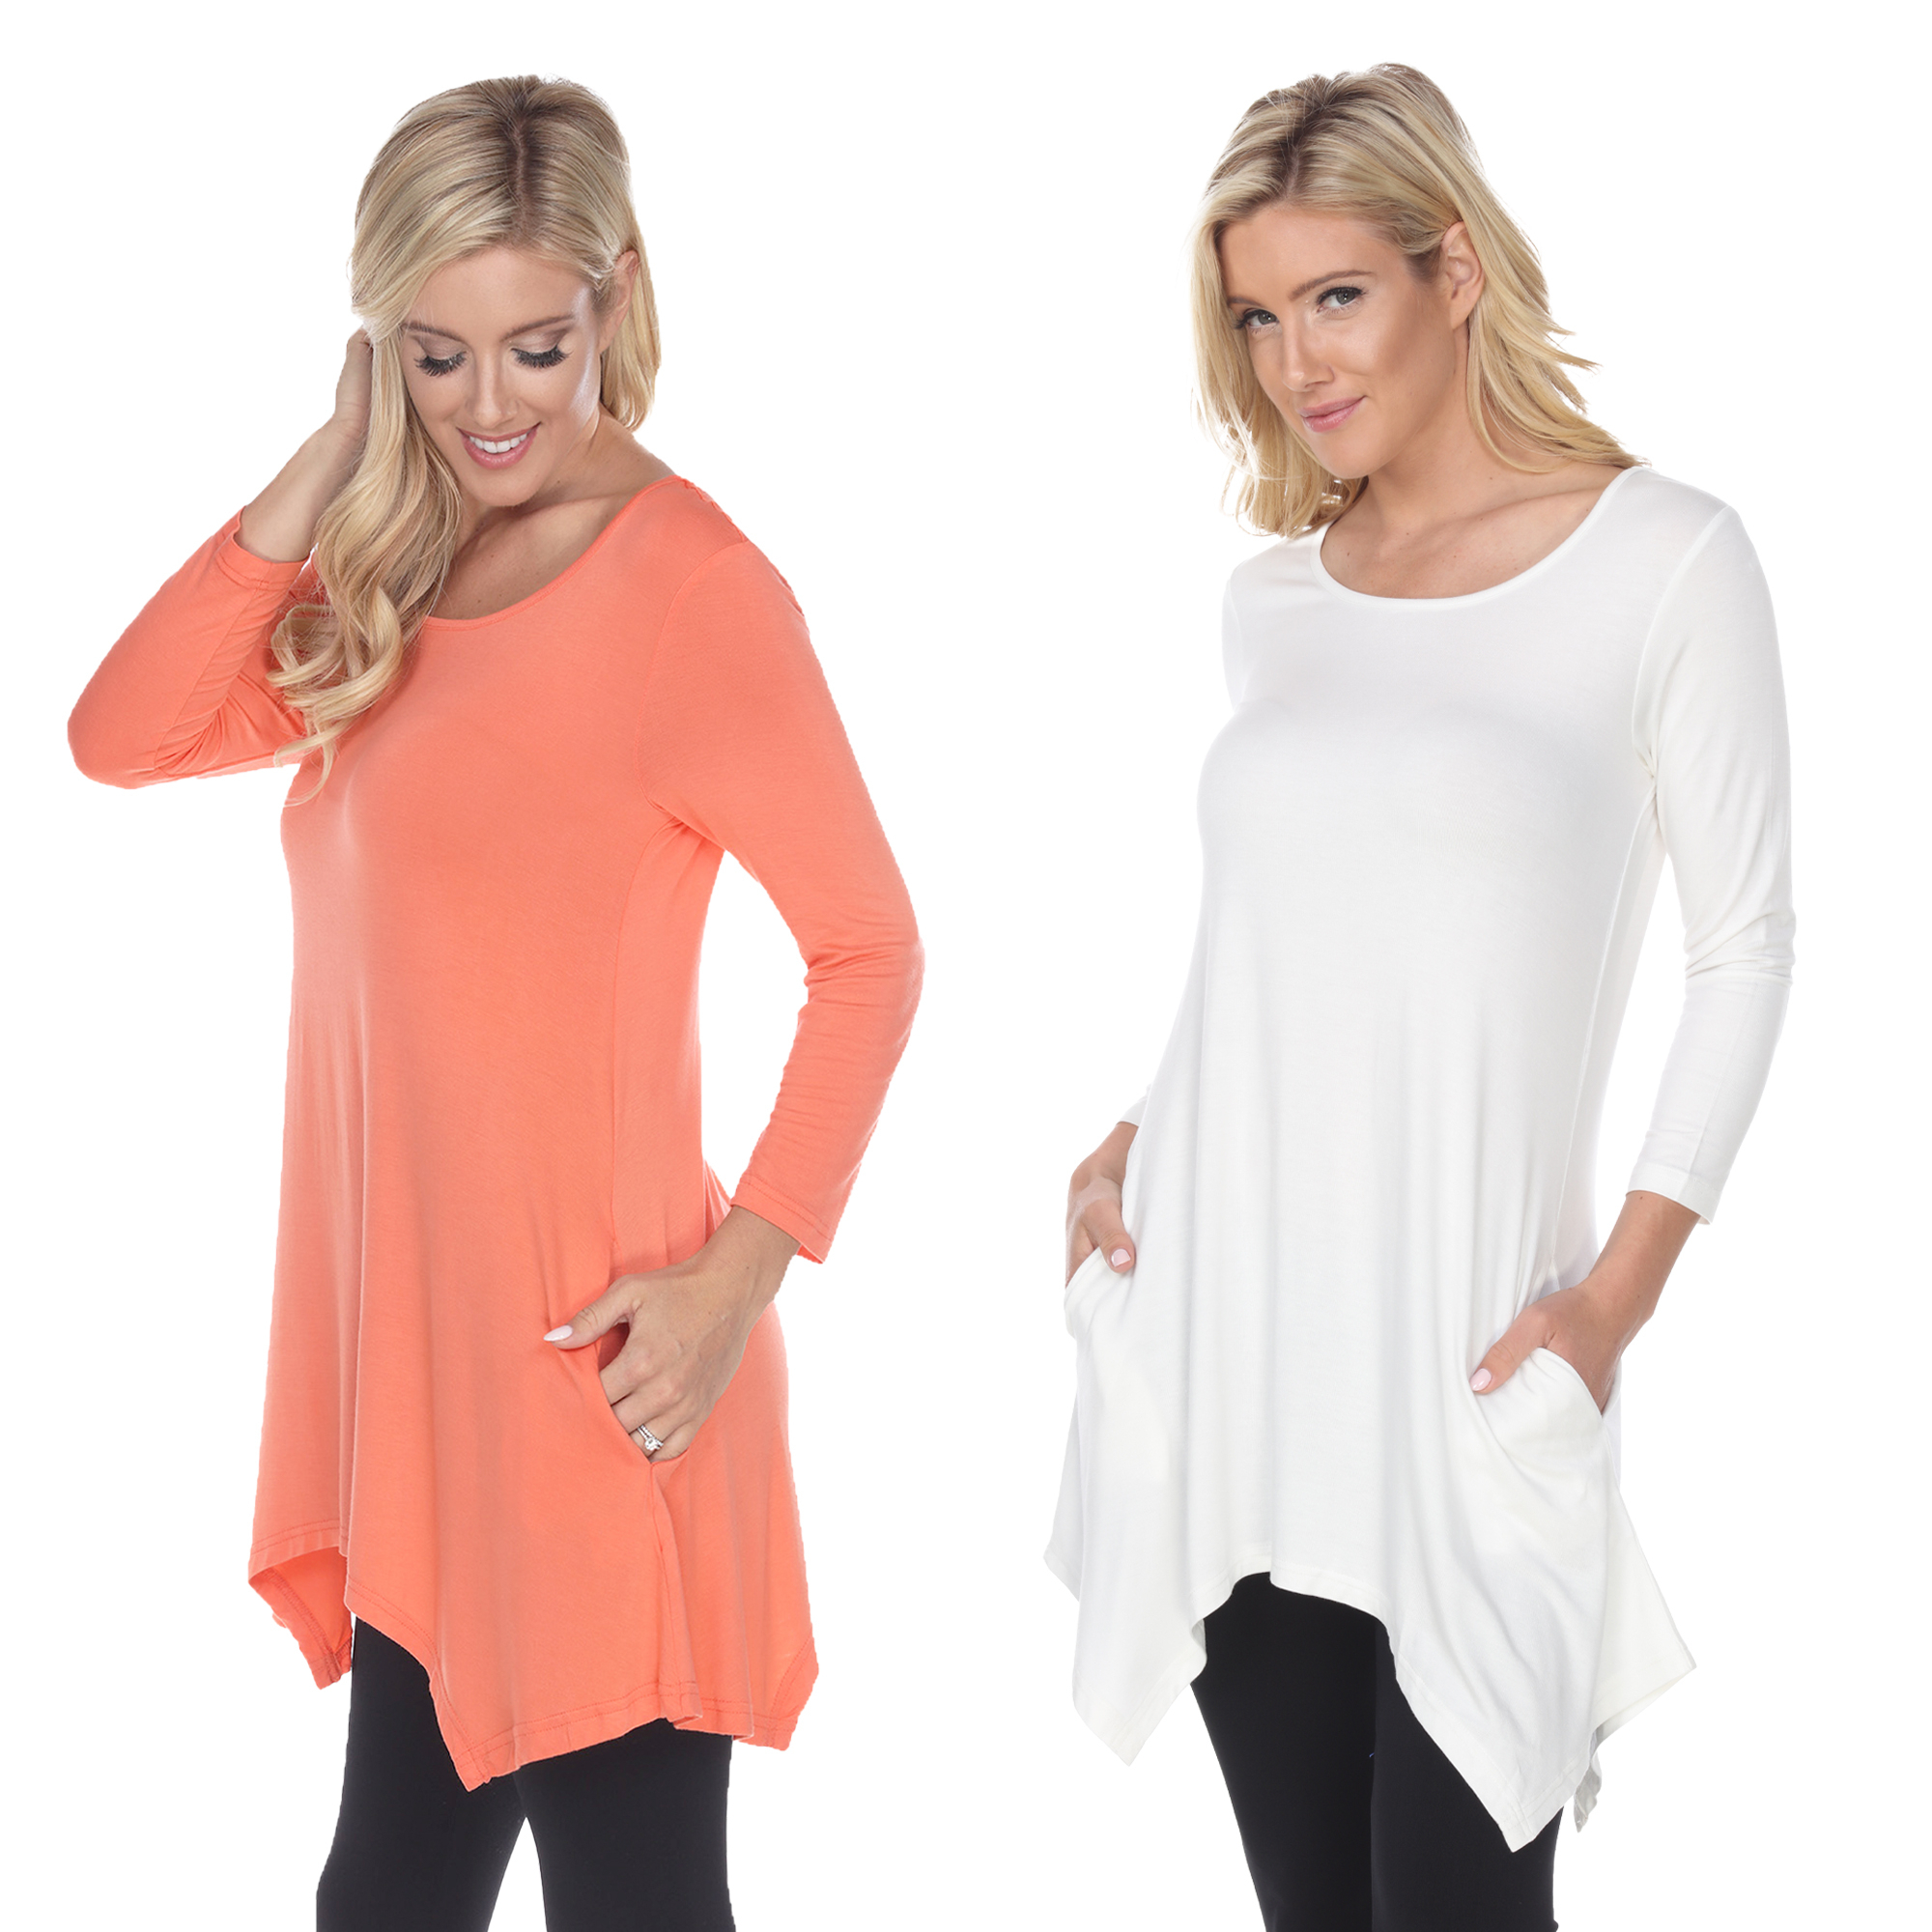 White Mark Women's Pack Of 2 White Tunic Top - White, Coral, Small